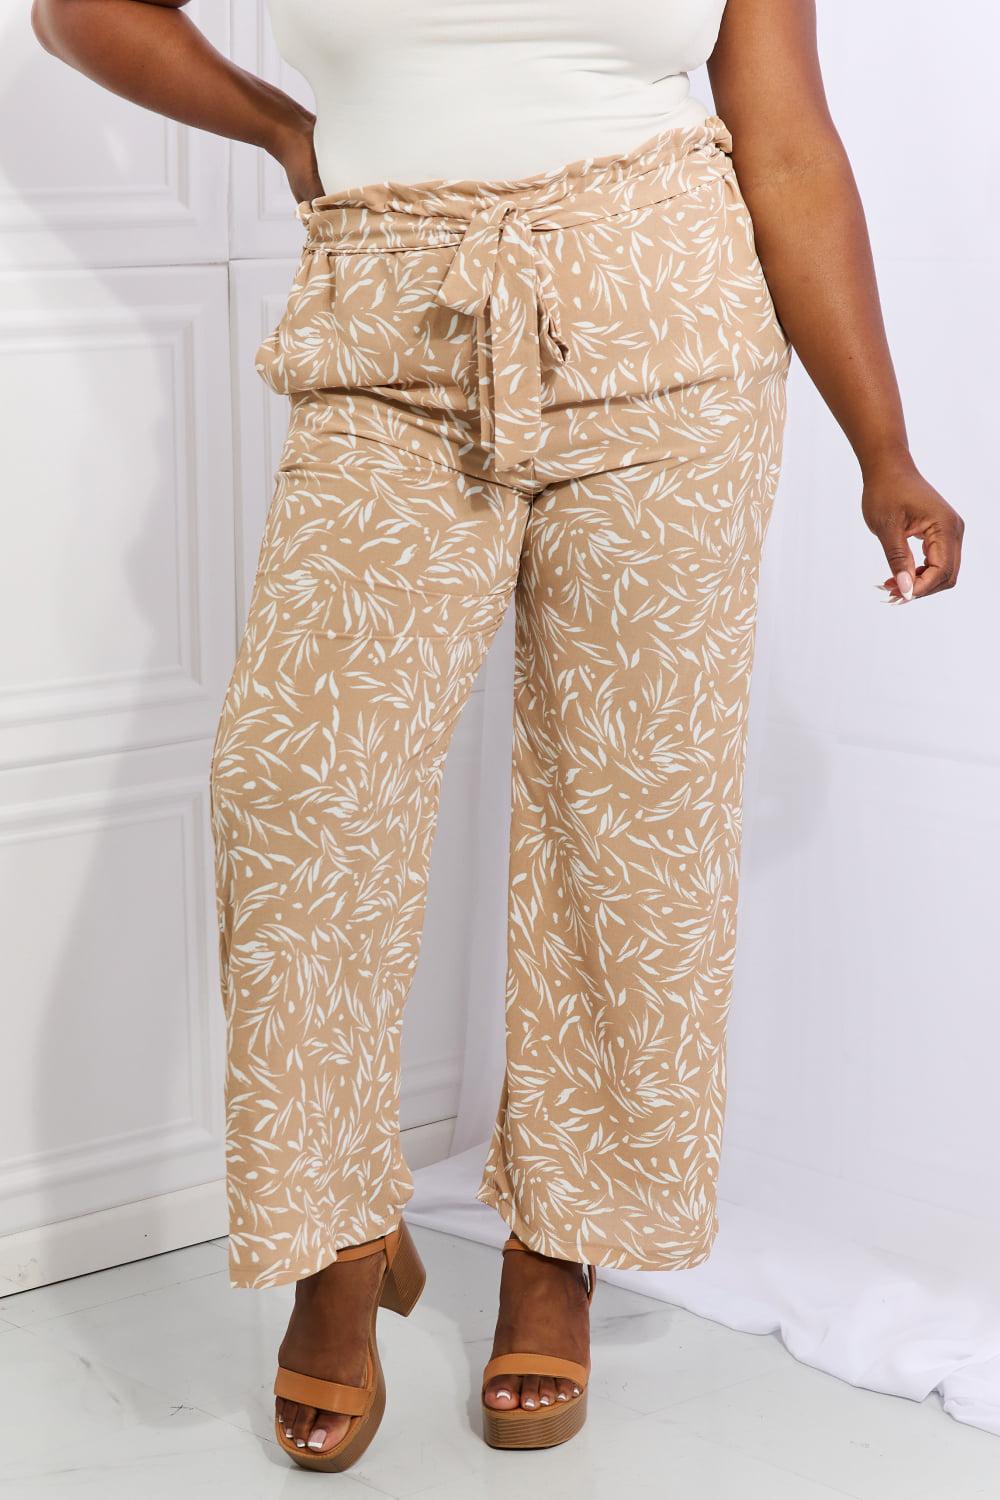 Heimish Right Angle Full Size Geometric Printed Pants in Tan BLUE ZONE PLANET